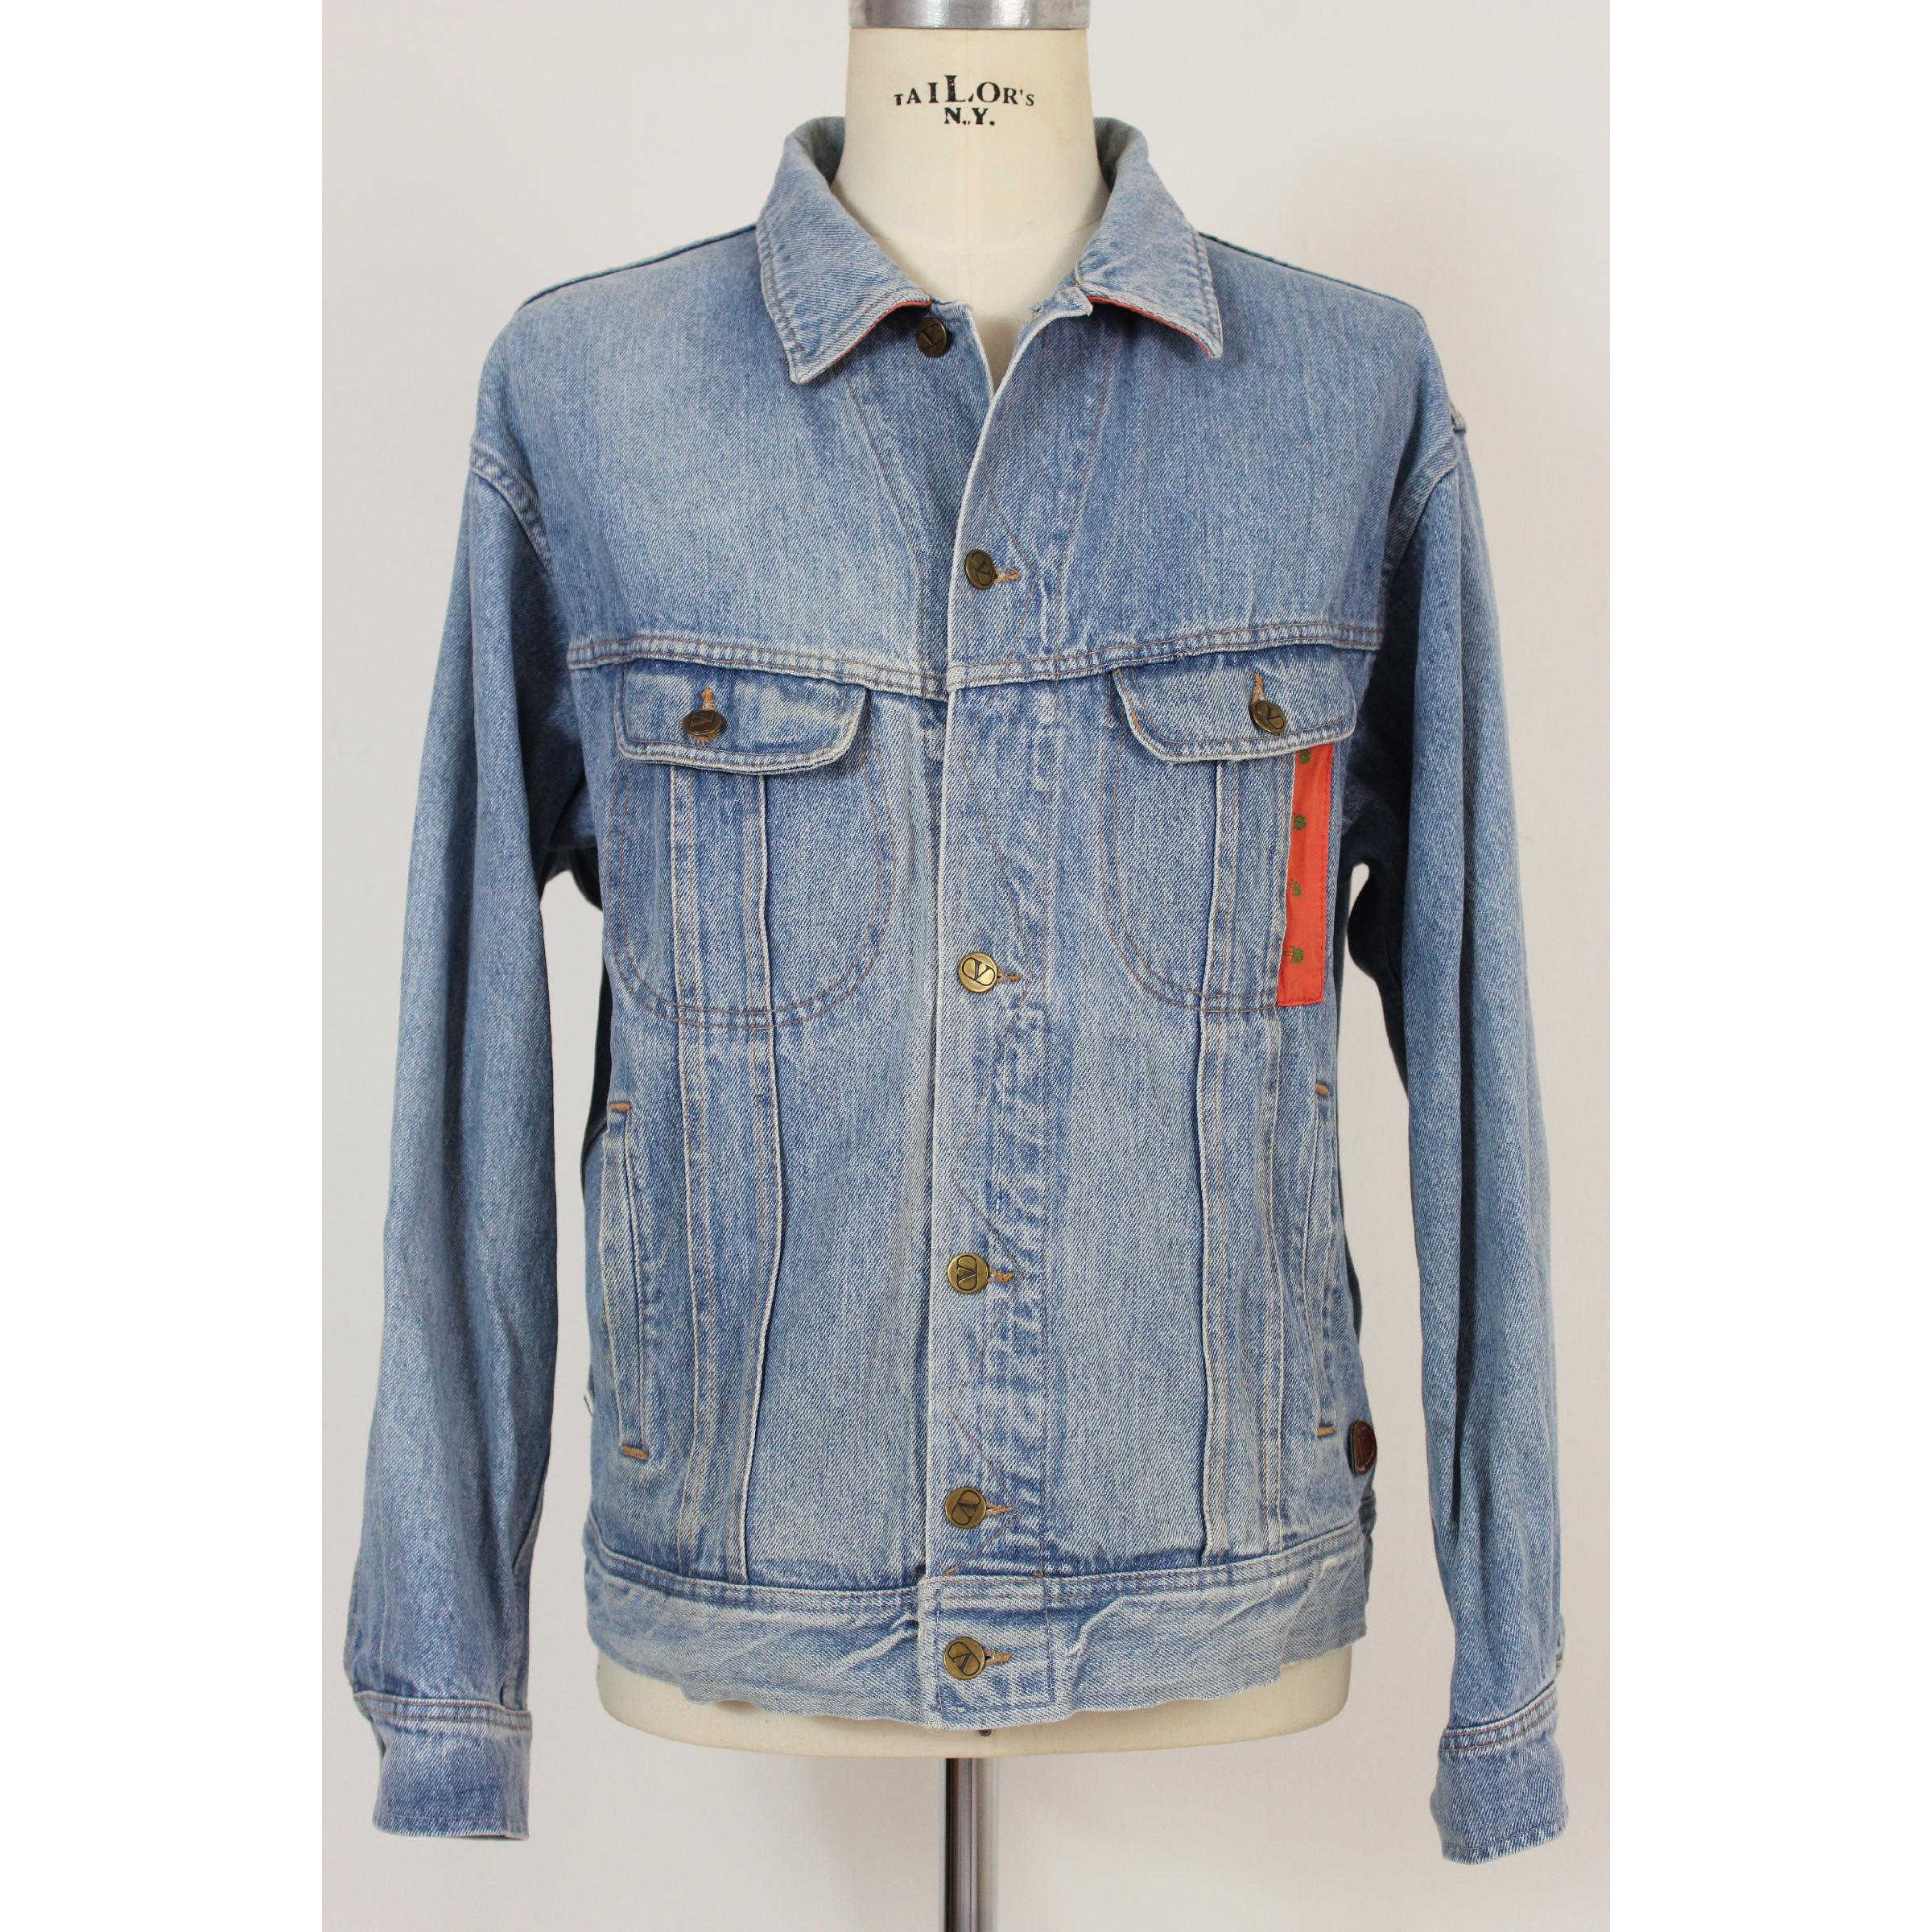 Valentino 80s vintage men's denim jacket. Light blue color, 100% cotton, wide pattern, colored insert, chest and hip pockets. Made in Italy. Very good vintage conditions, some small spots like in the picture. Not visible once worn.

Size: 48 It 38